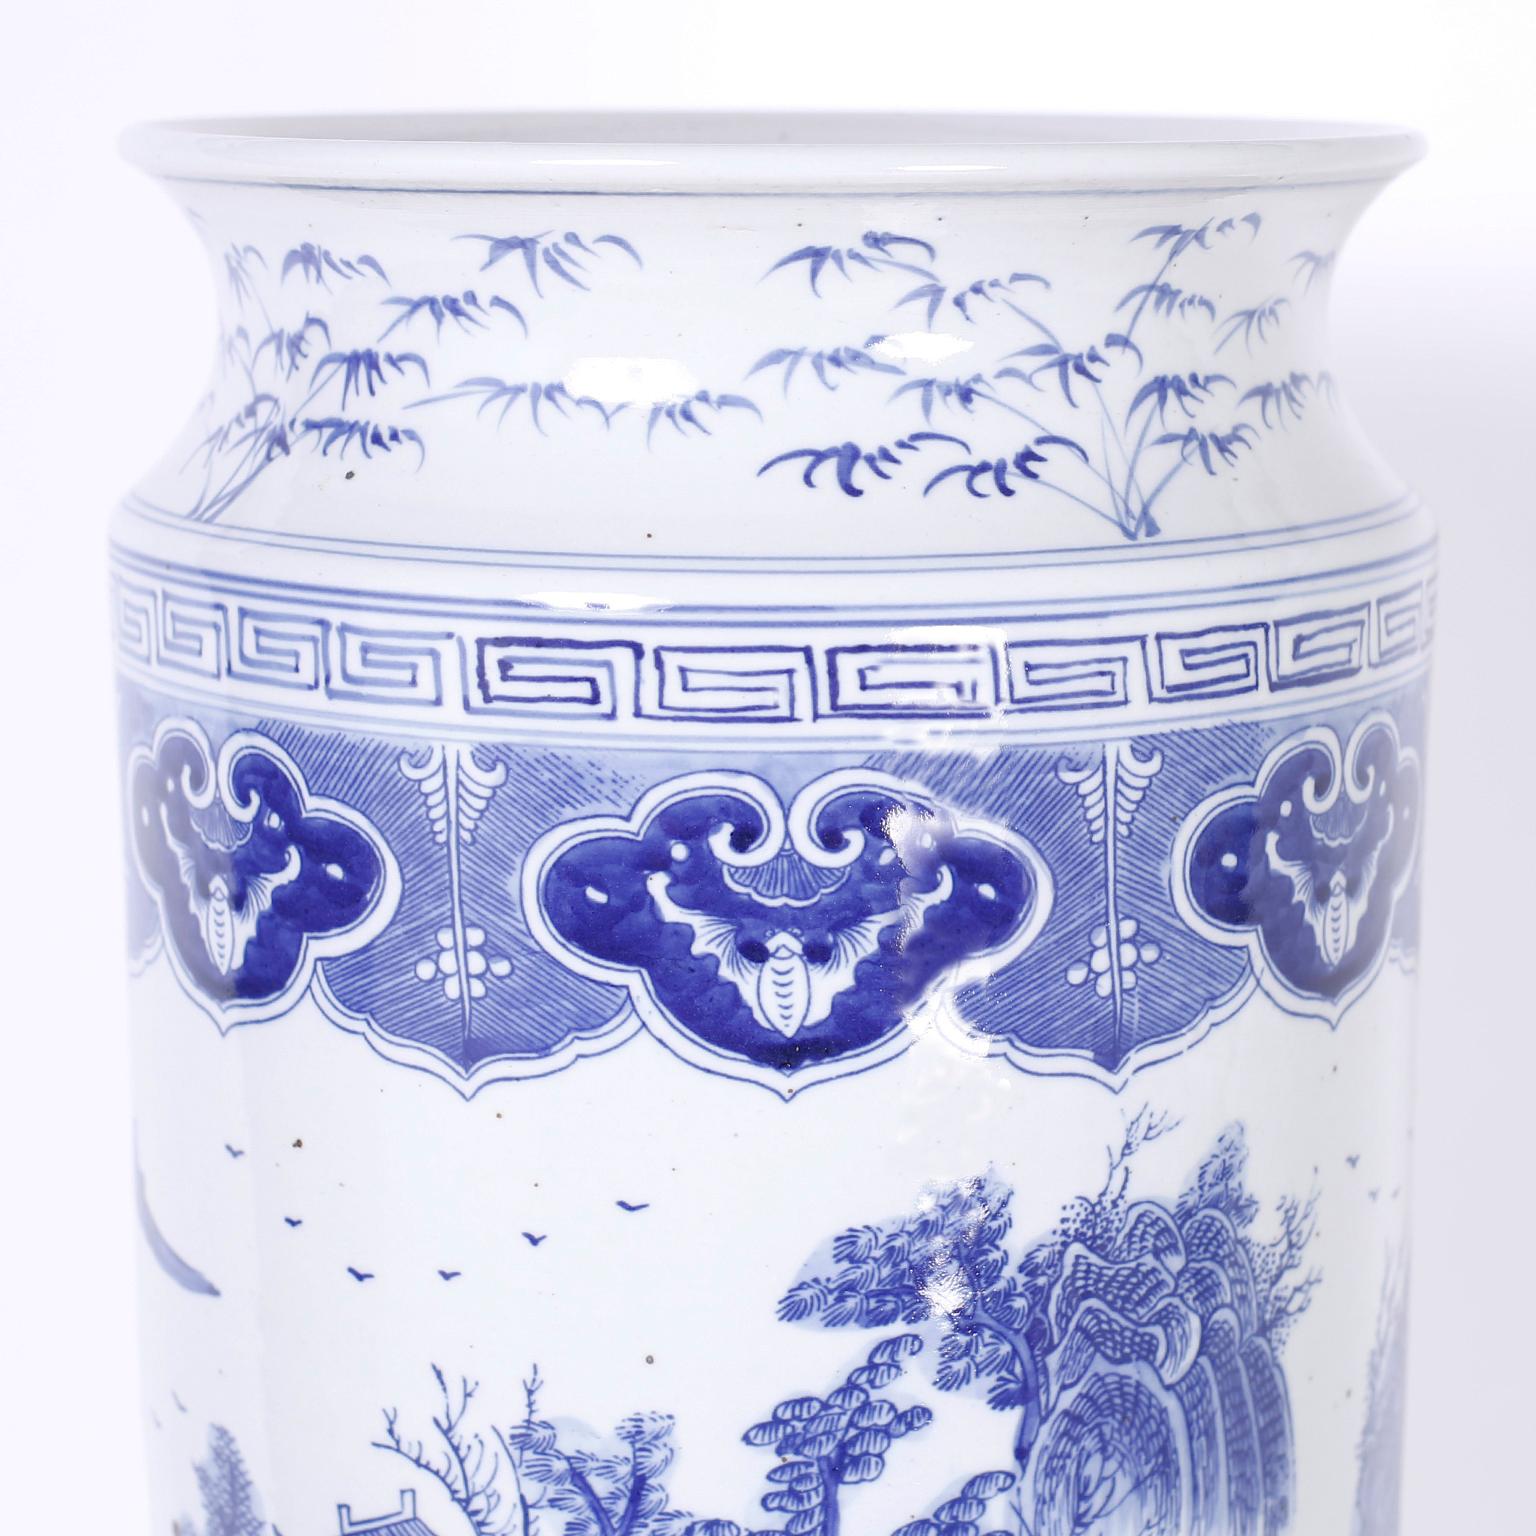 Chinoiserie Blue and White Porcelain Umbrella Stand